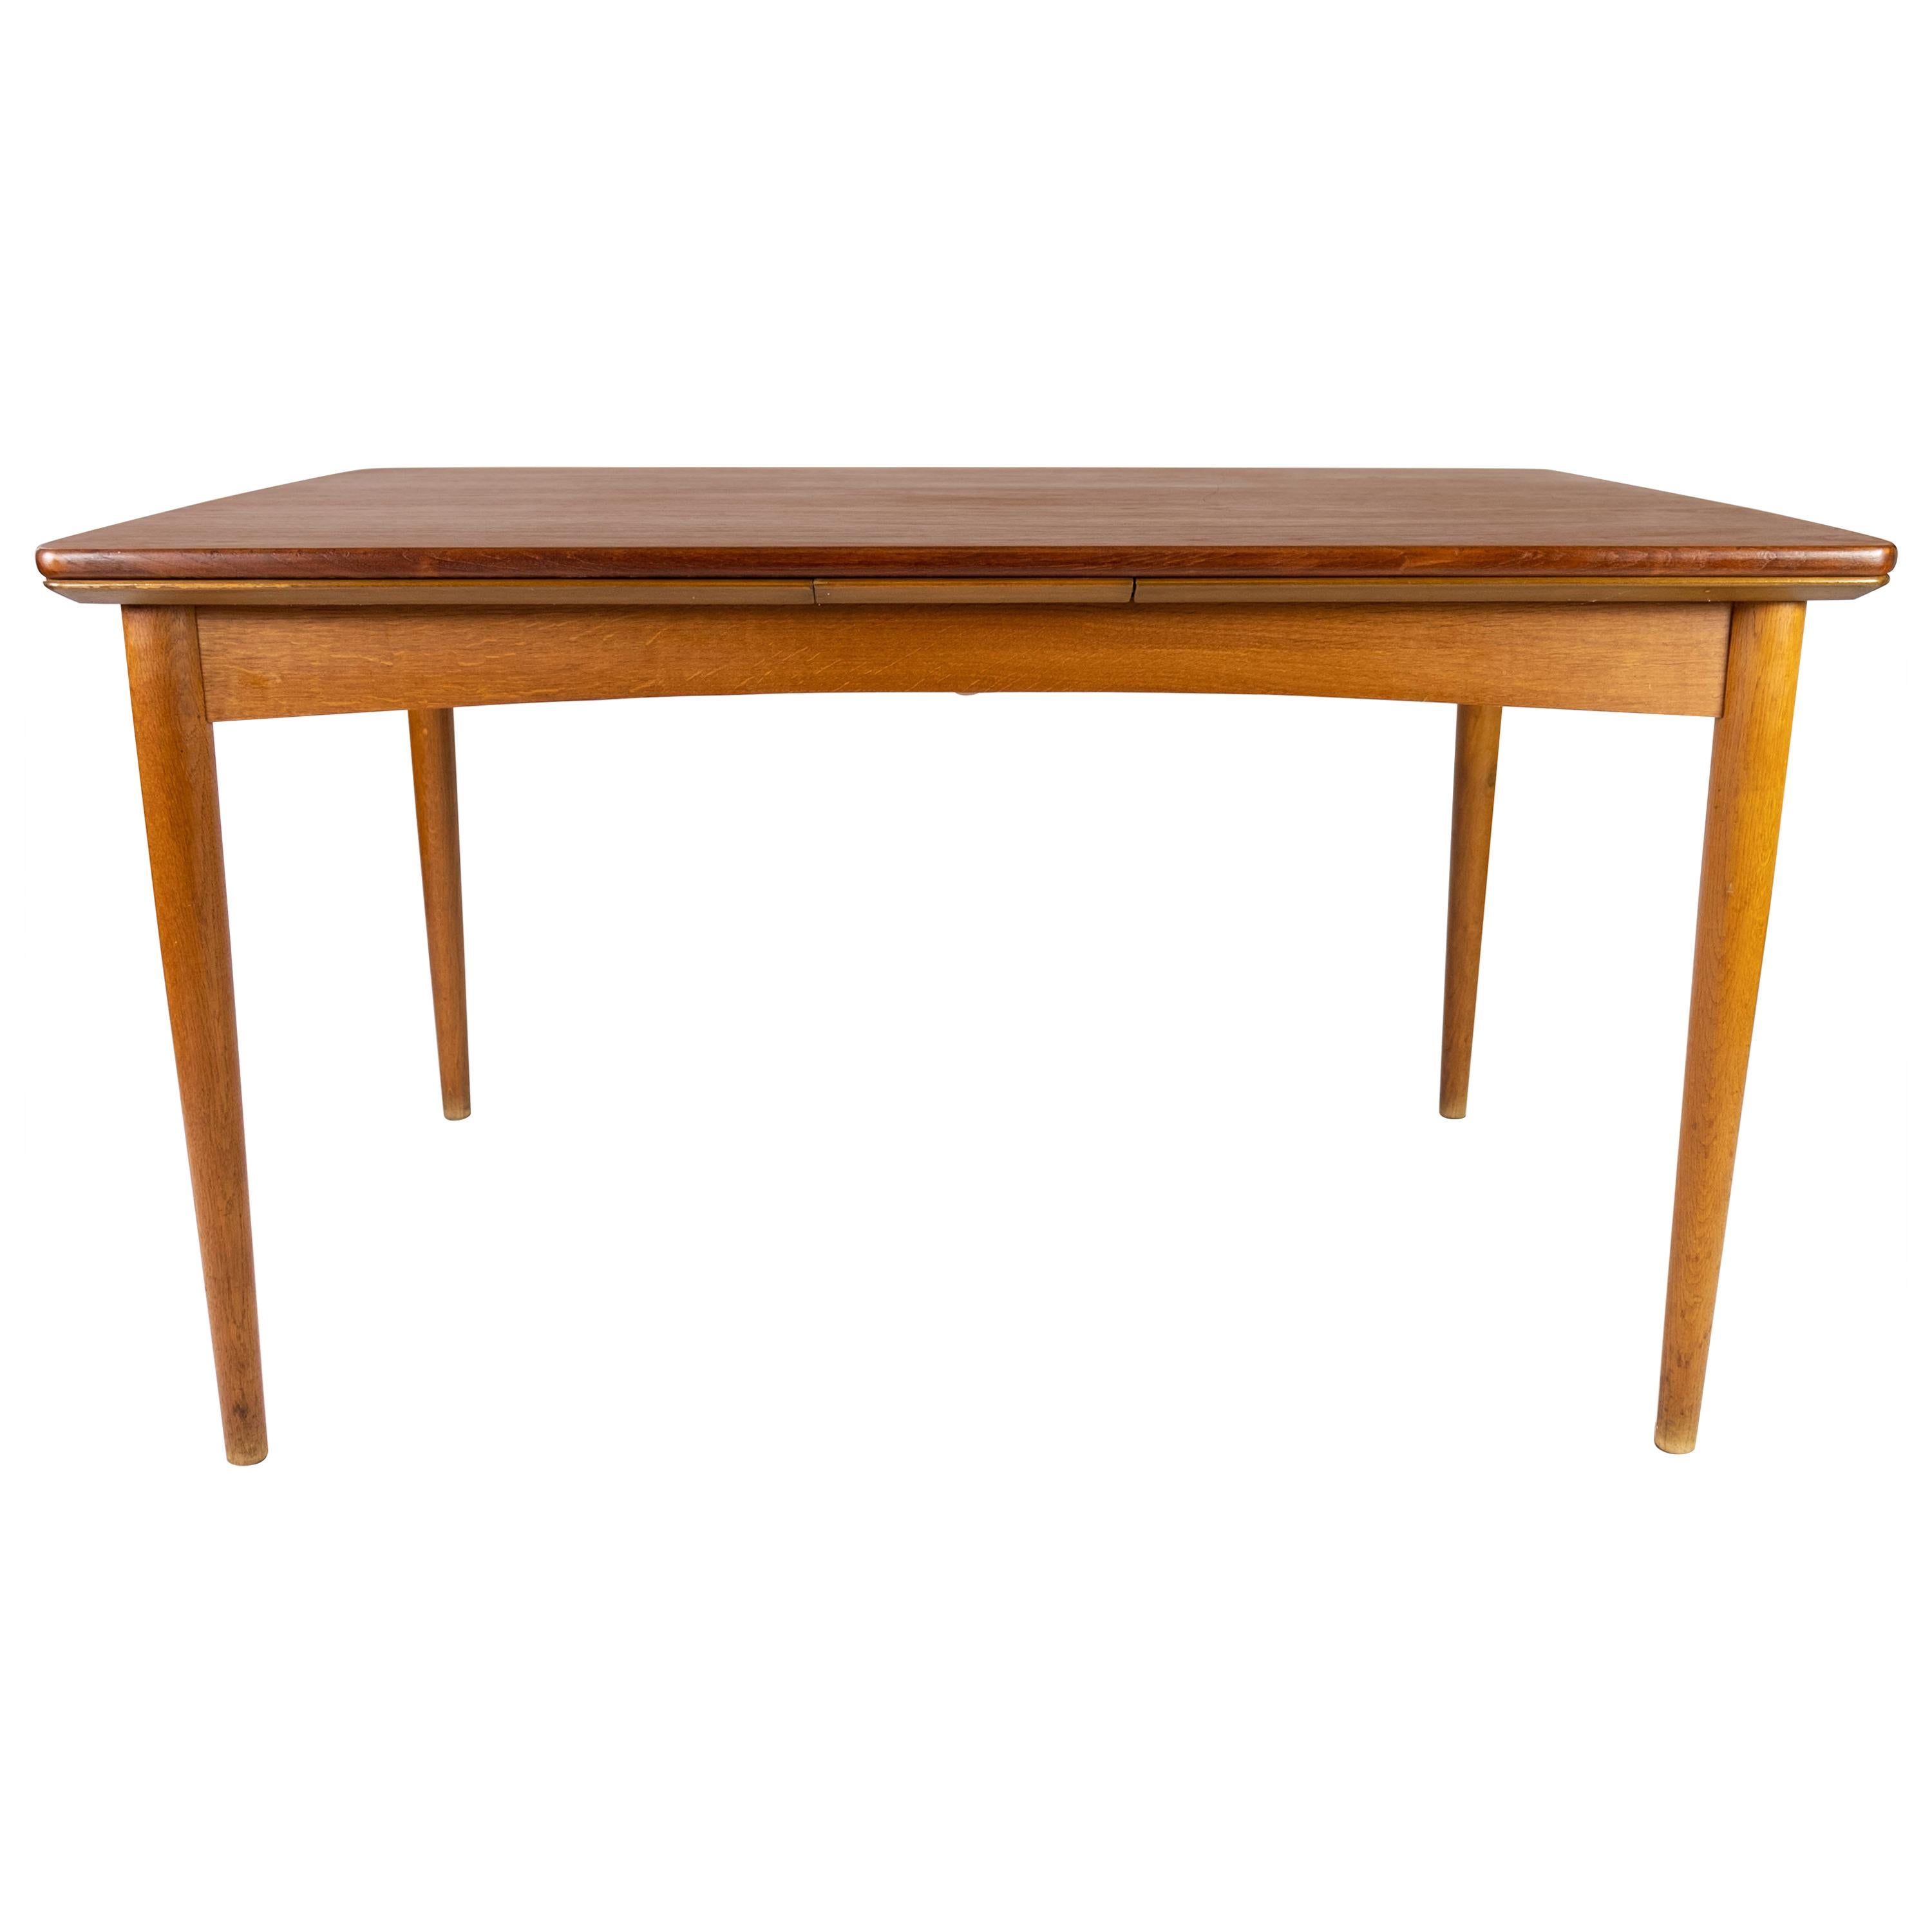 Dining Table Made In Teak With Extentions & Legs In Oak From 1960s